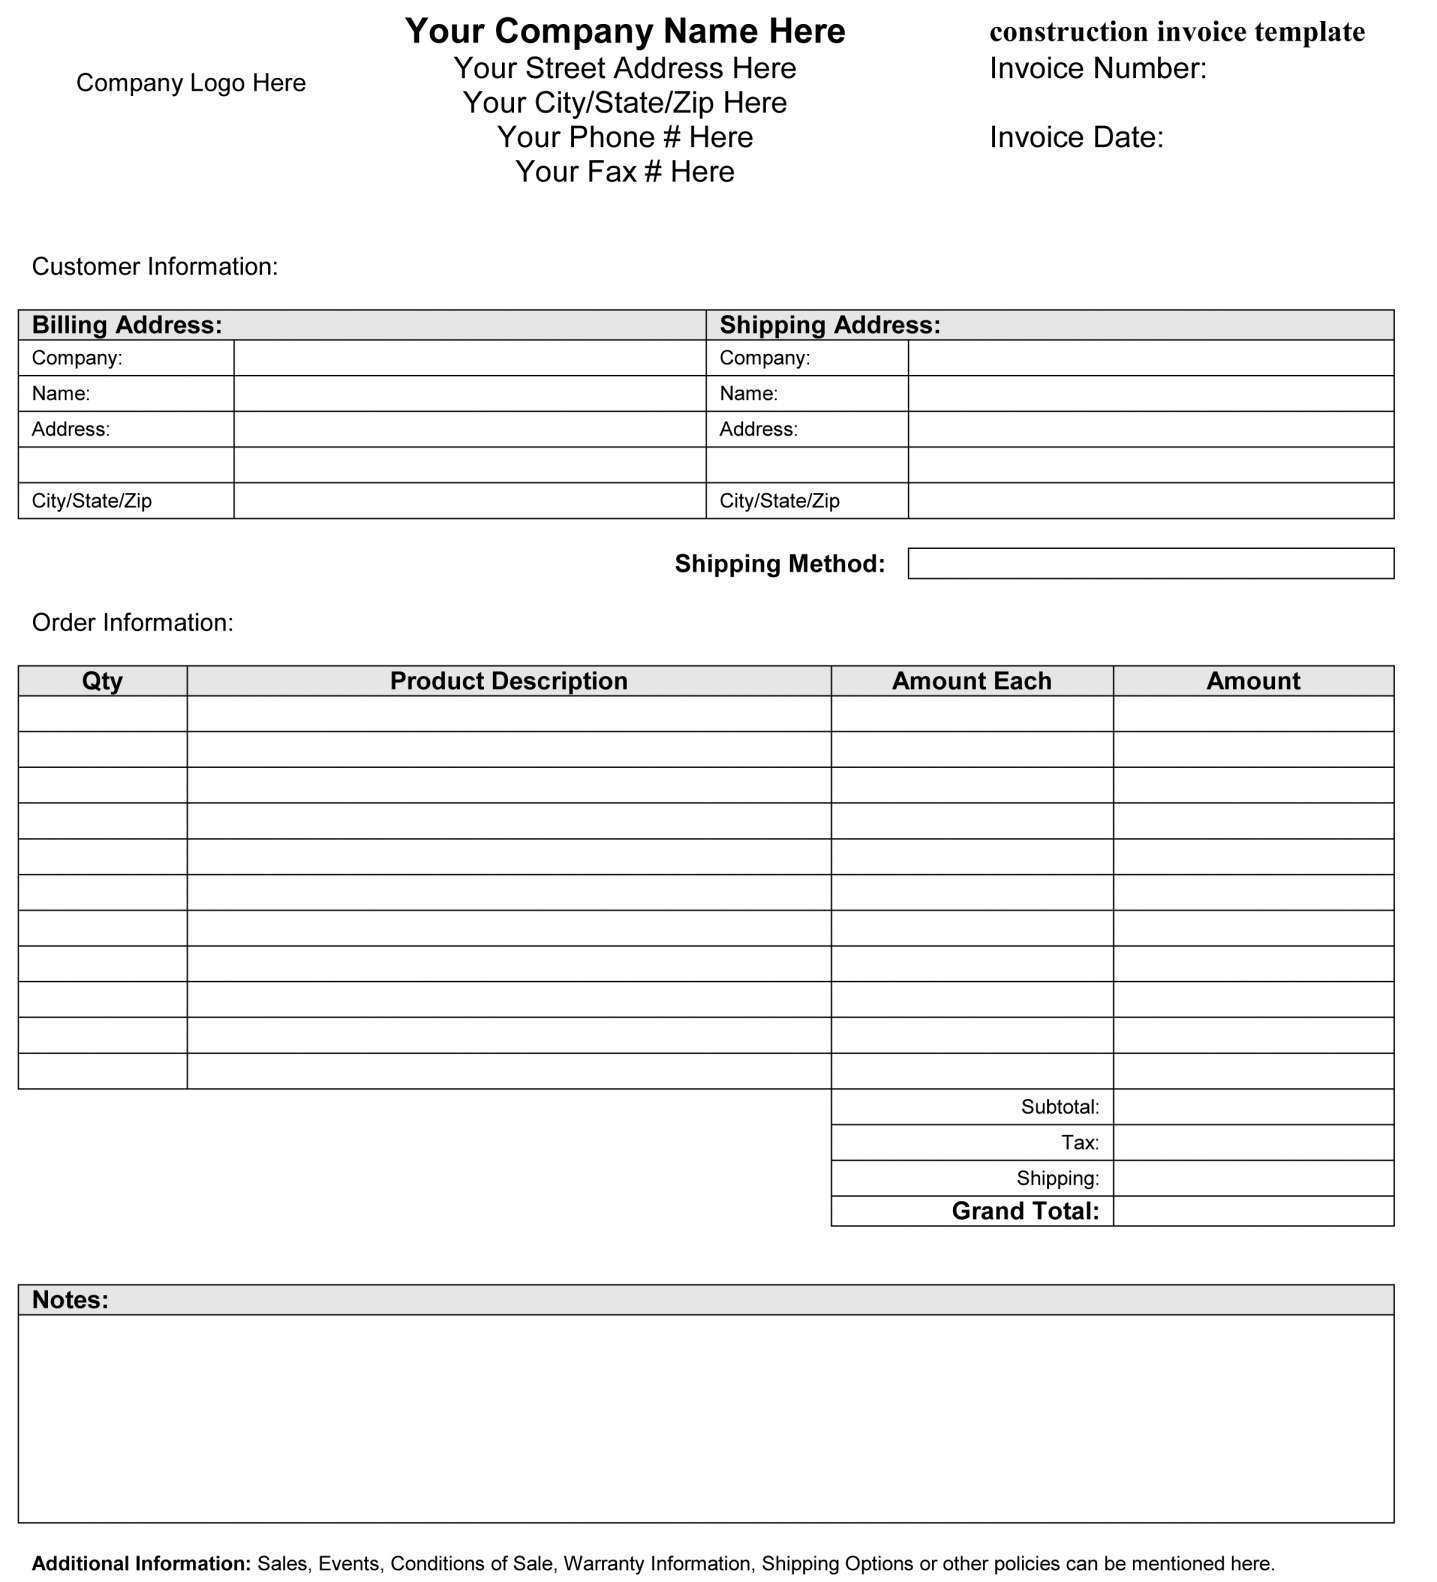 28 Customize Our Free Construction Invoice Template Xls Photo by Construction Invoice Template Xls